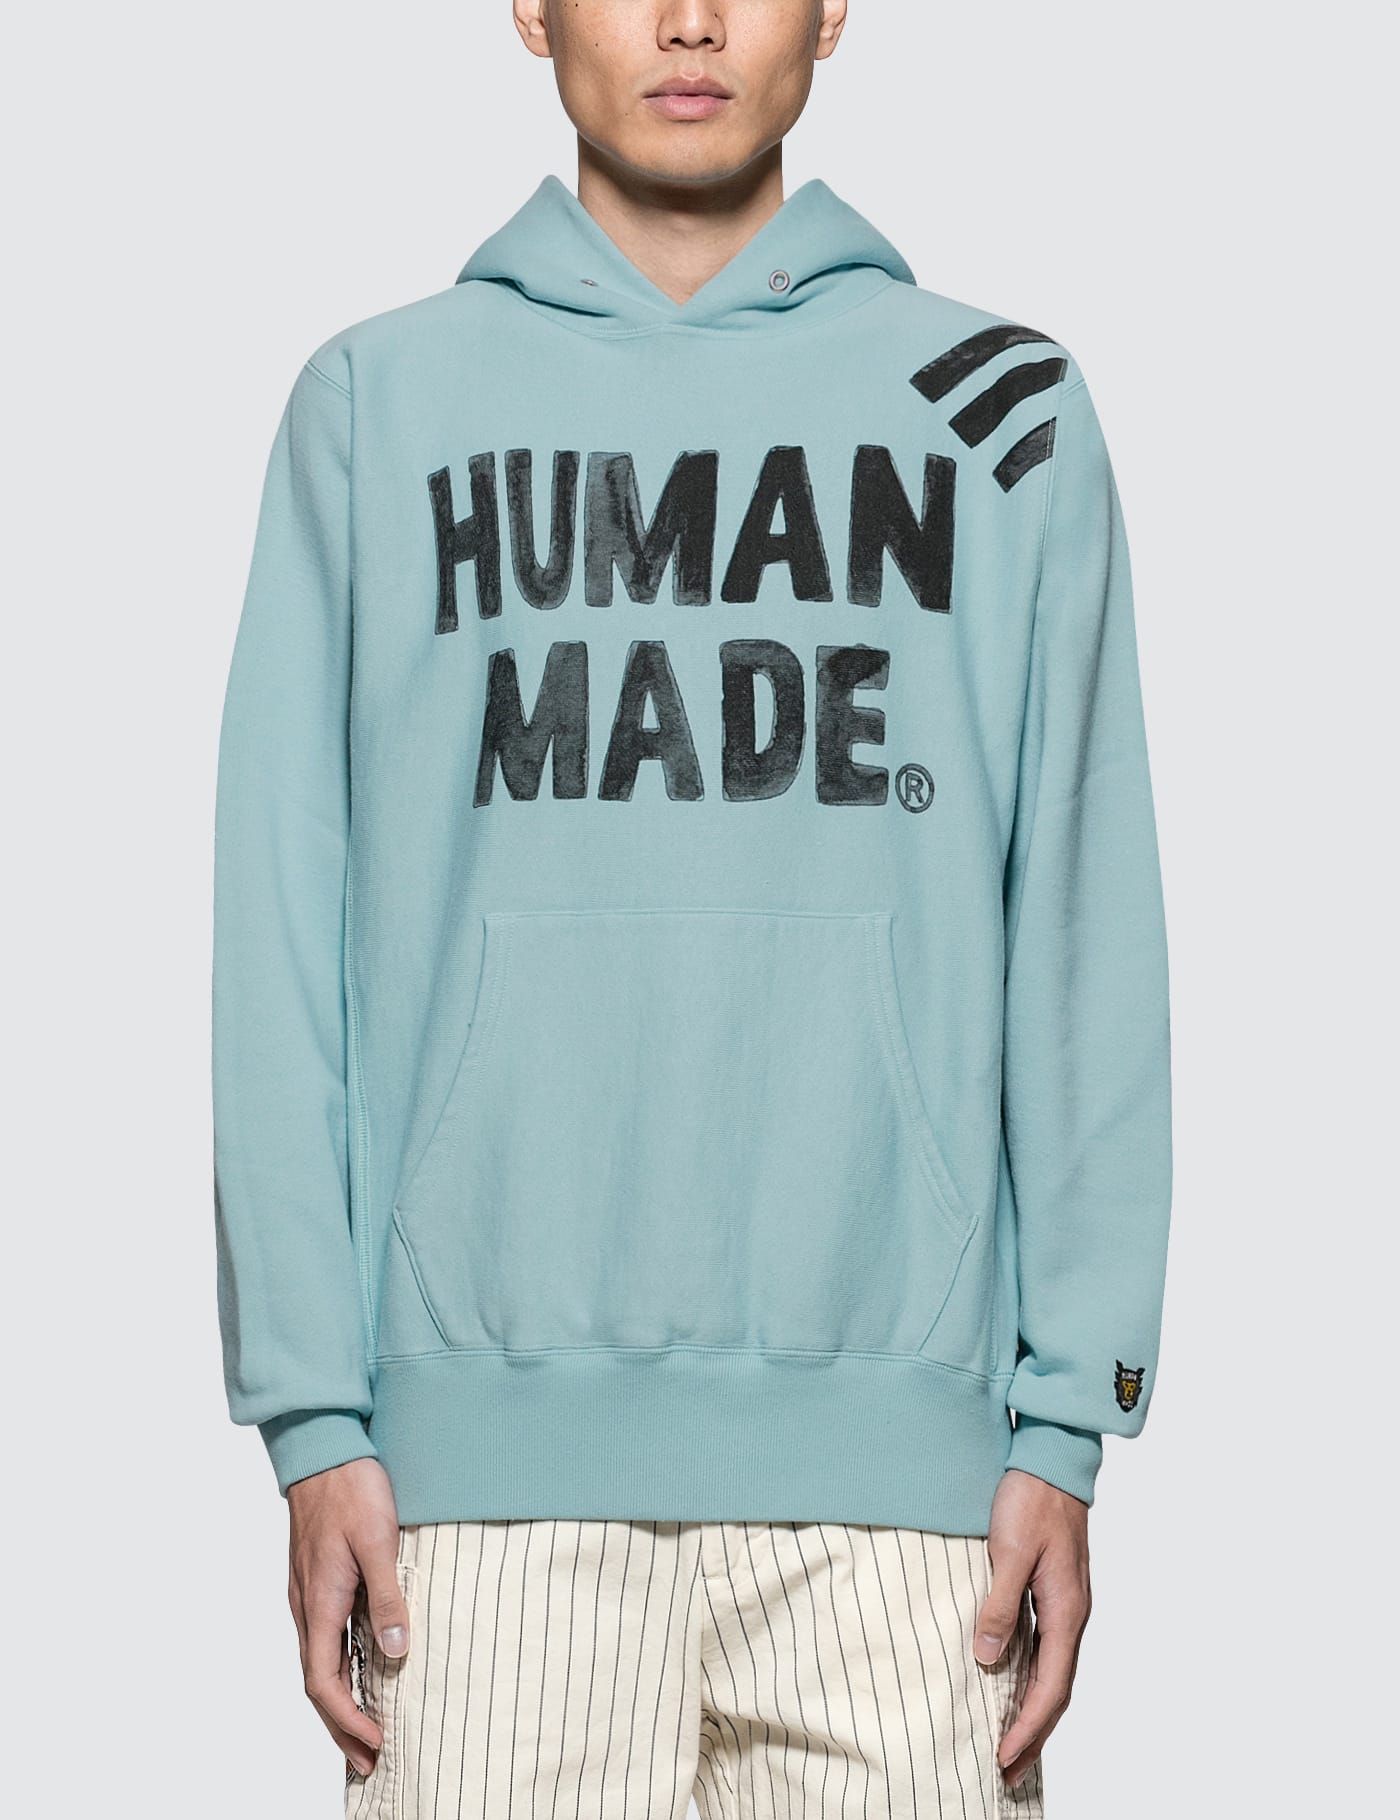 Human Made - Pizza Hoodie | HBX - Globally Curated Fashion and 